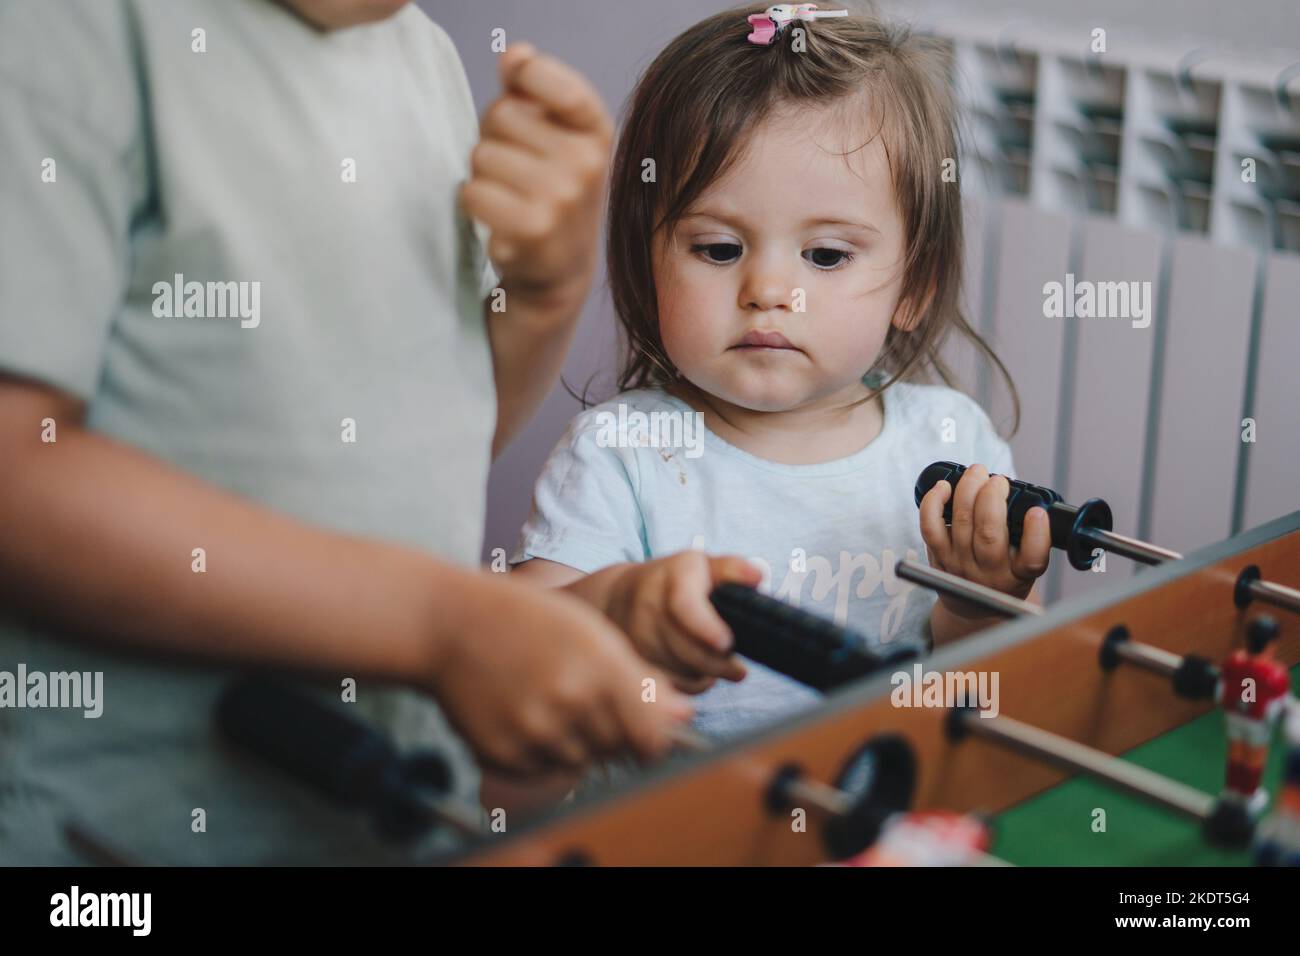 Baby's younger sister watching with admiration how her brother playing table football. Teamwork concept. Football concept. Children development Stock Photo